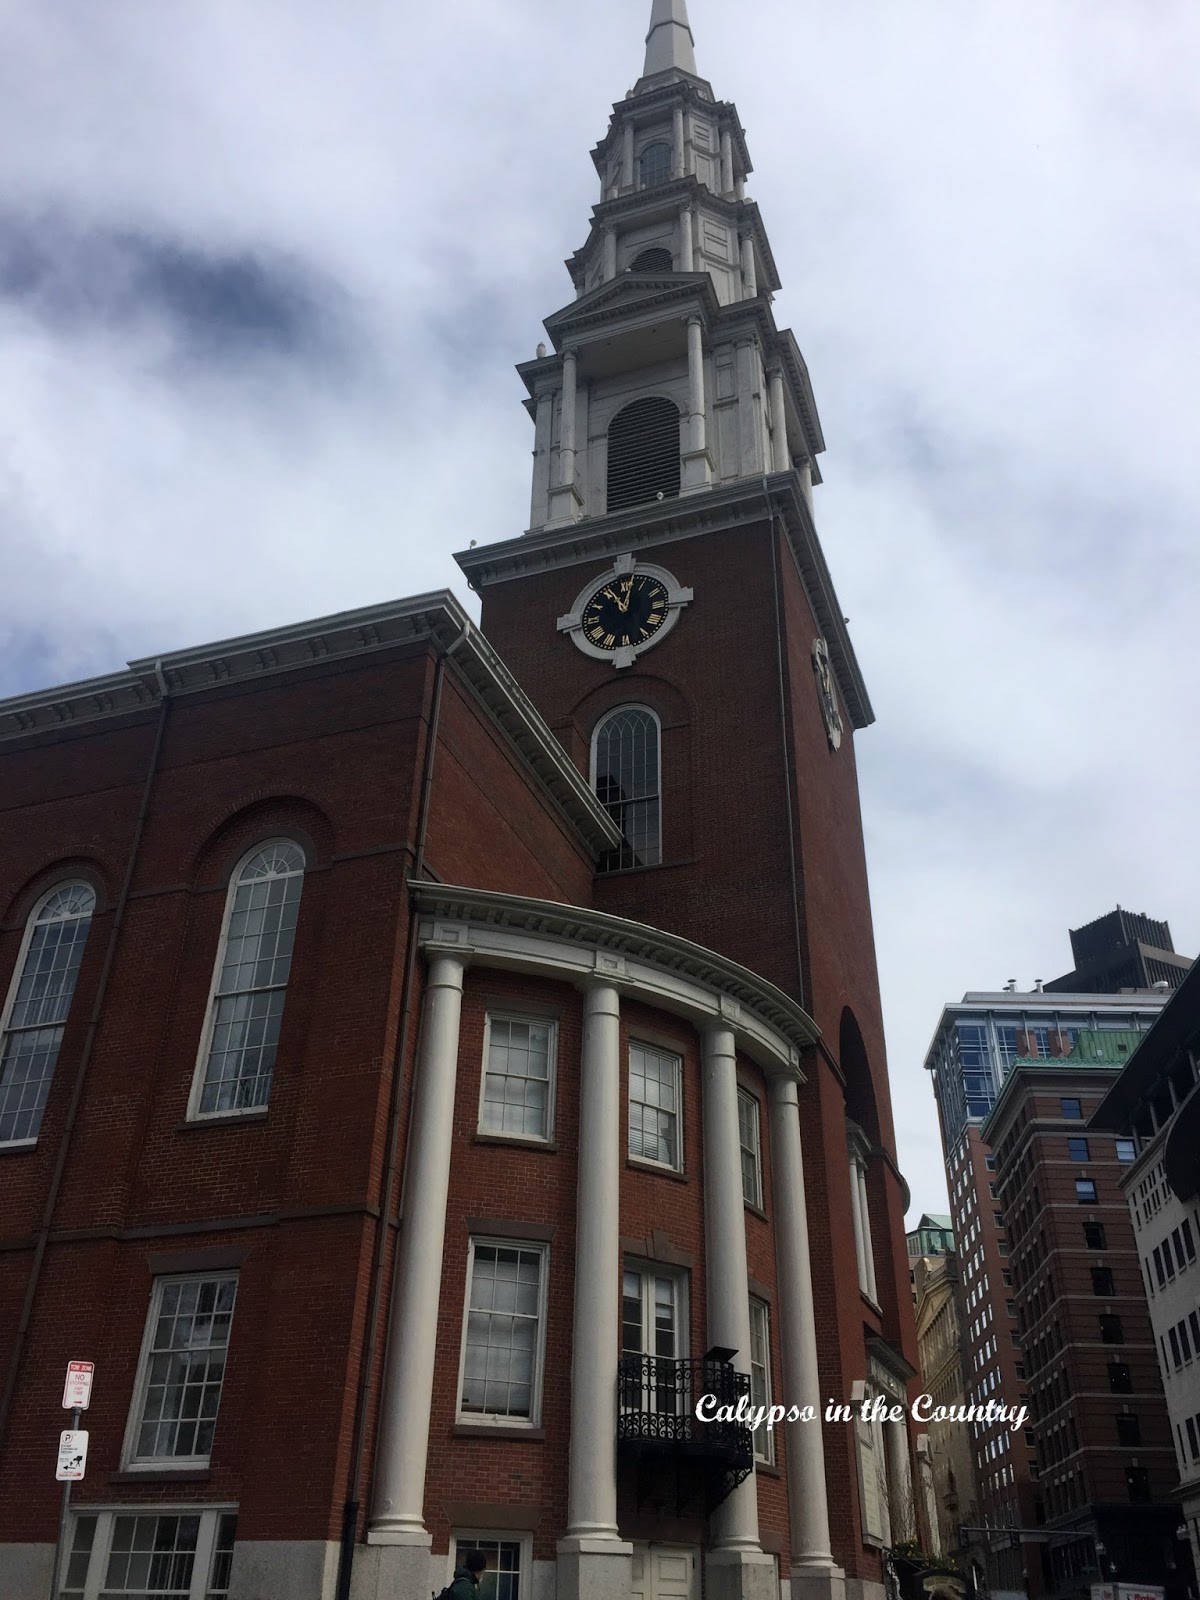 Park Street Church - the 2nd stop on Boston's Freedom Trail